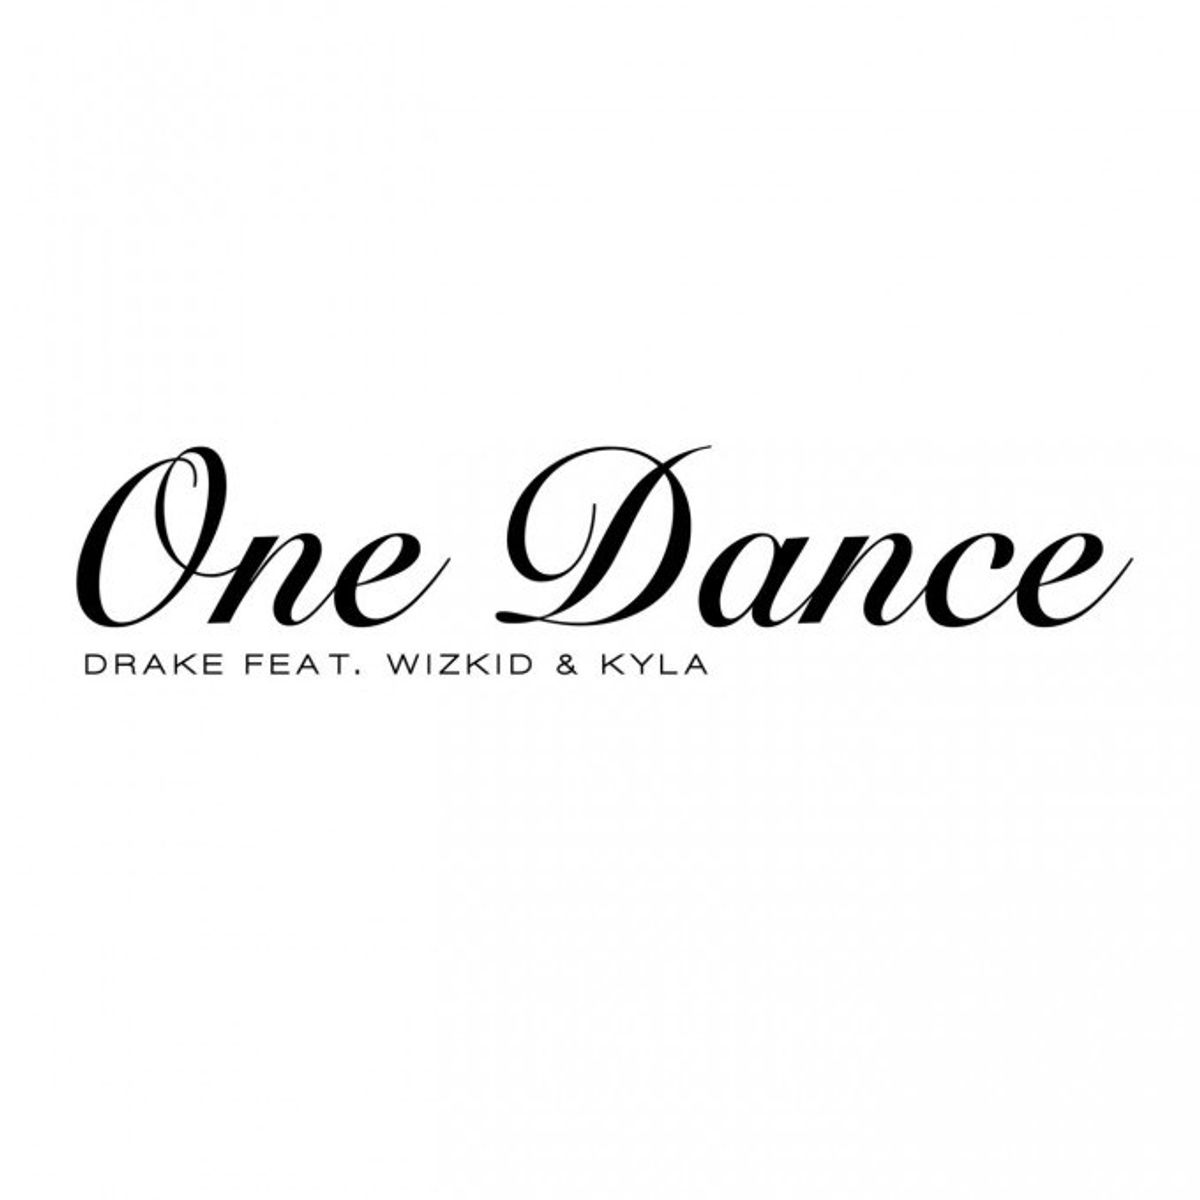 'One Dance': Song of the Summer?